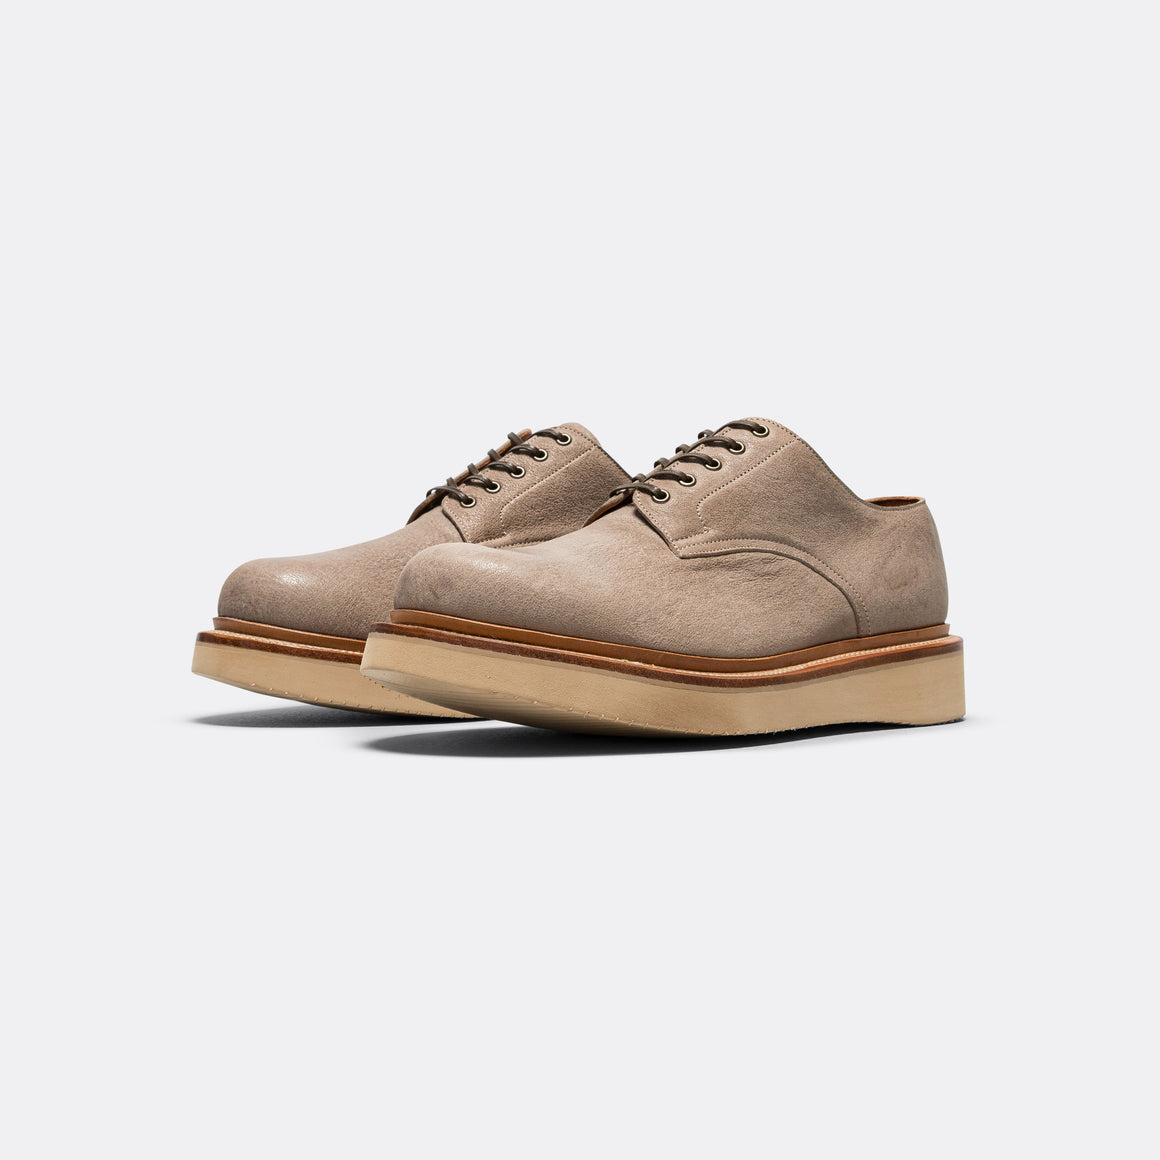 Viberg - Rockland Blucher by UP THERE - Washed Ram Grey - UP THERE